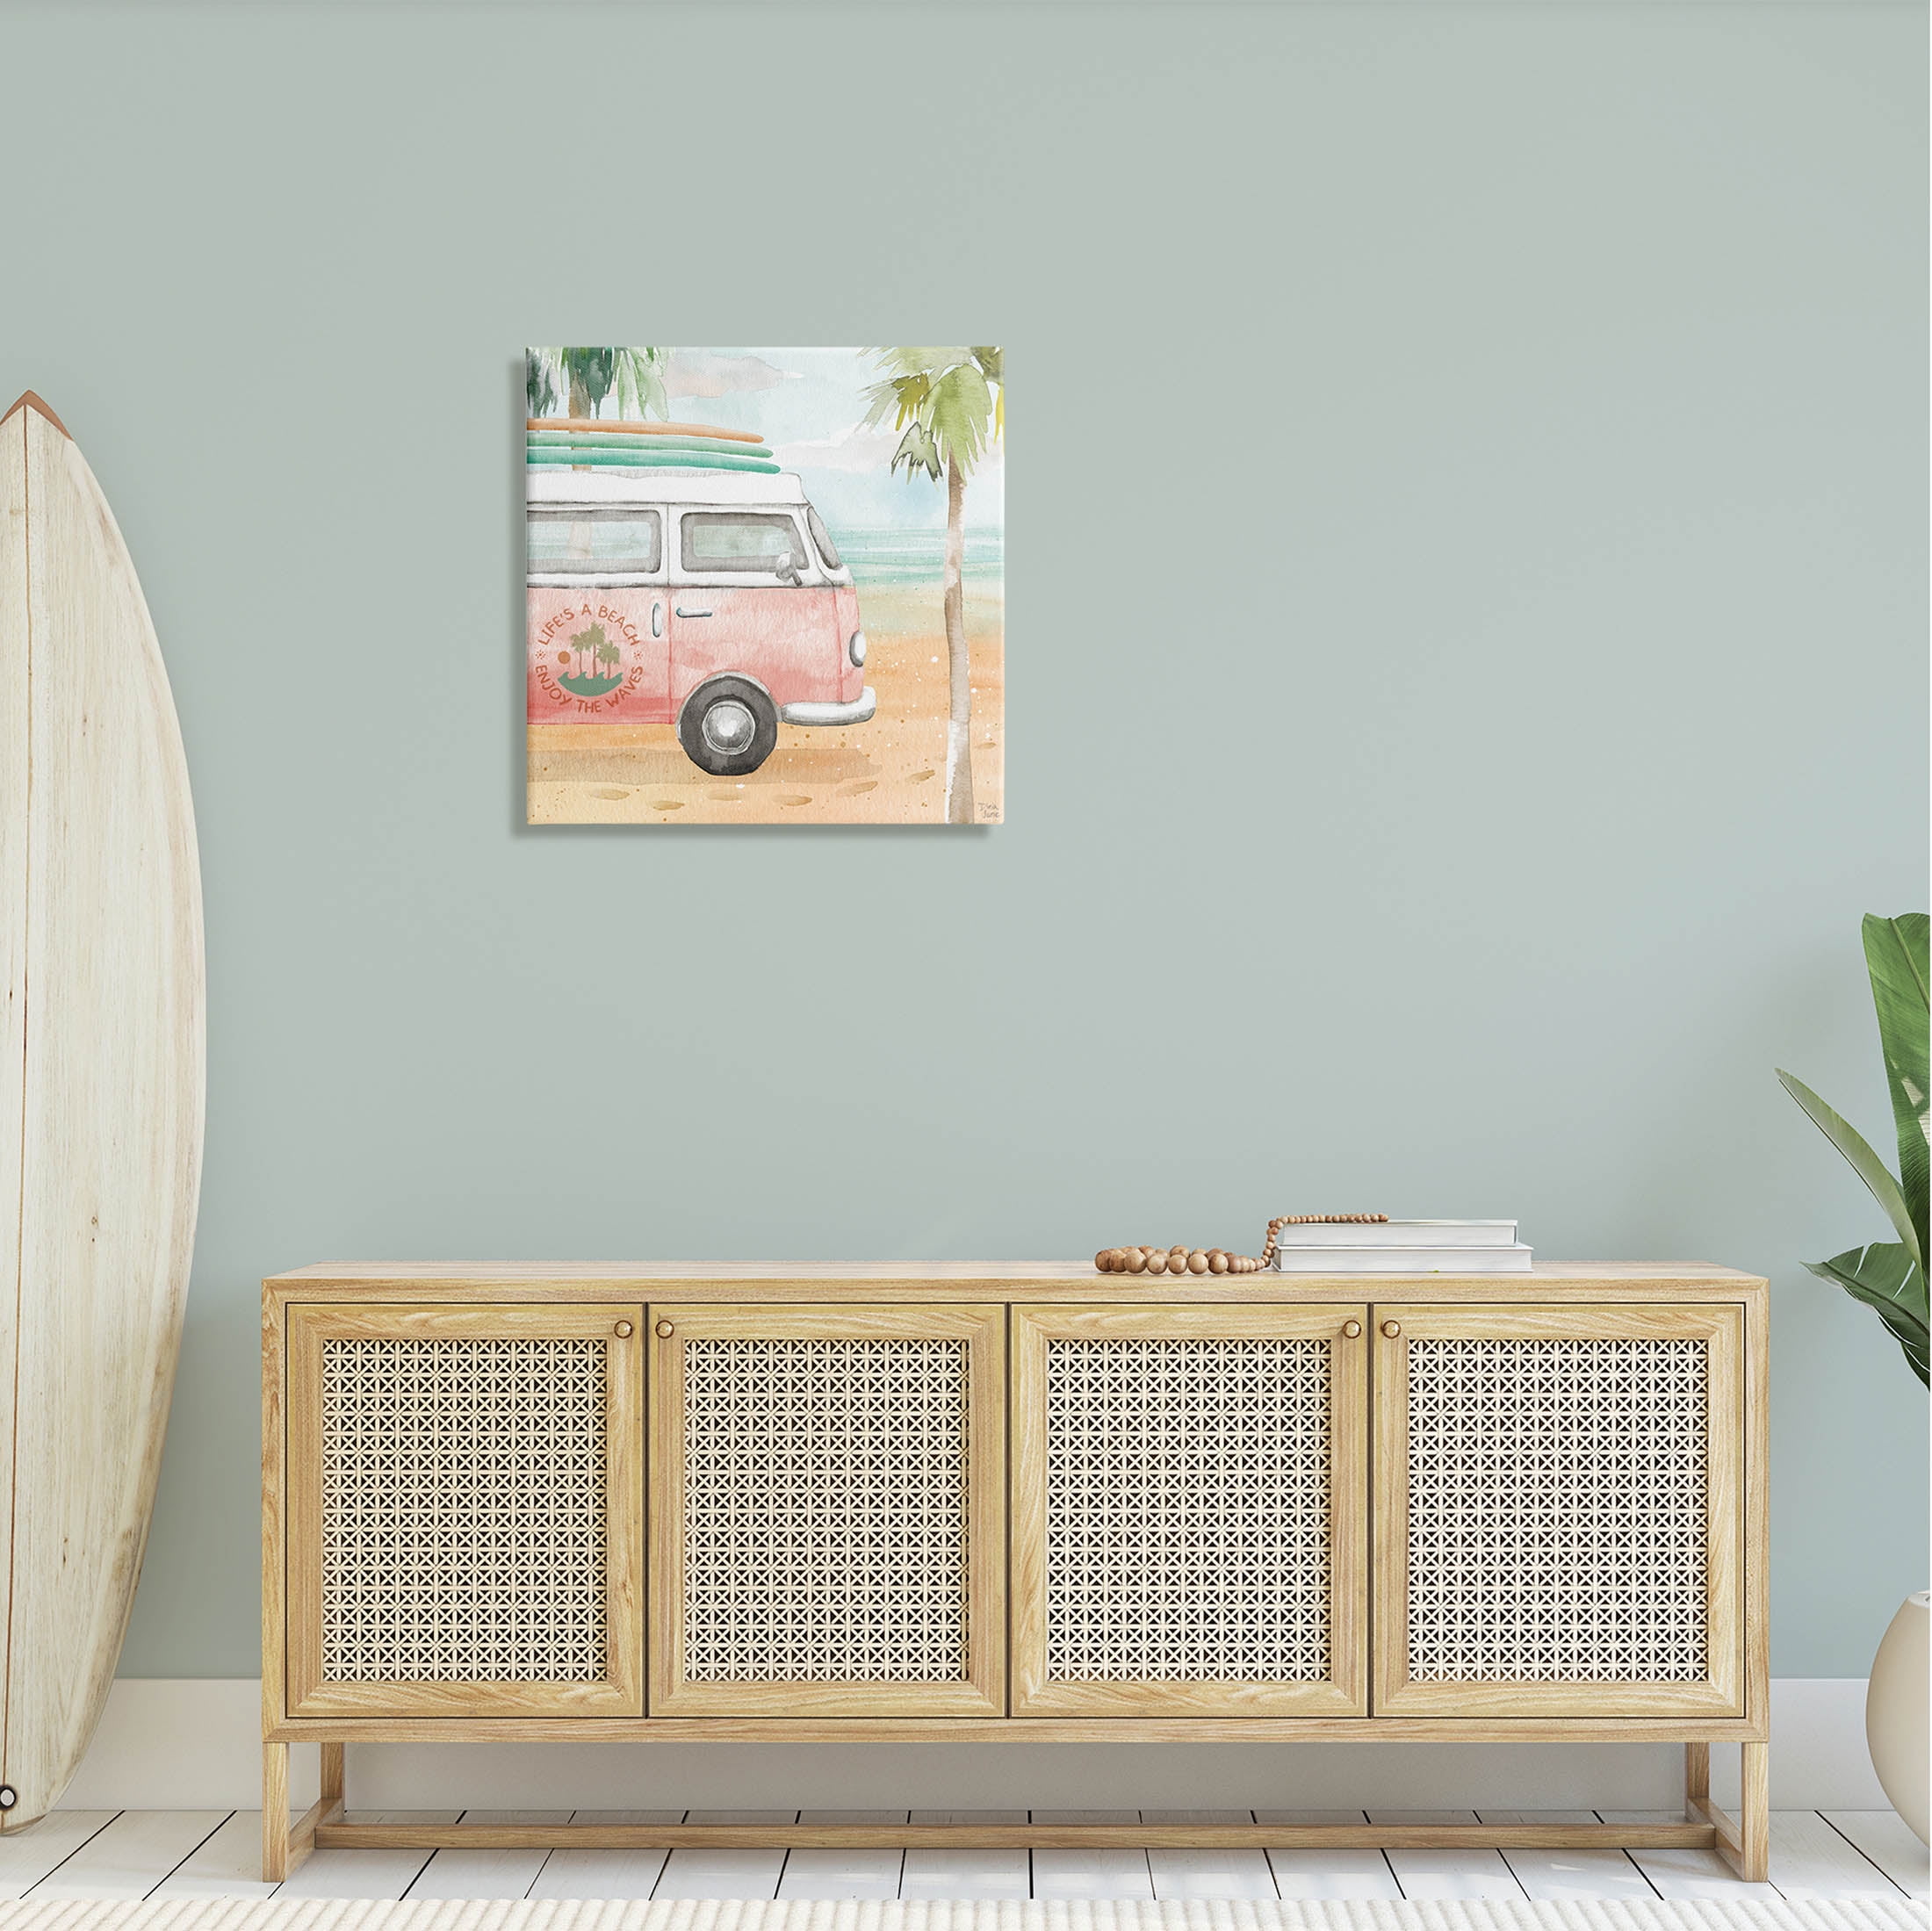 Stupell Industries Life's a Beach Pink Surf Van Painting Gallery Wrapped  Canvas Print Wall Art, Design by Dina June